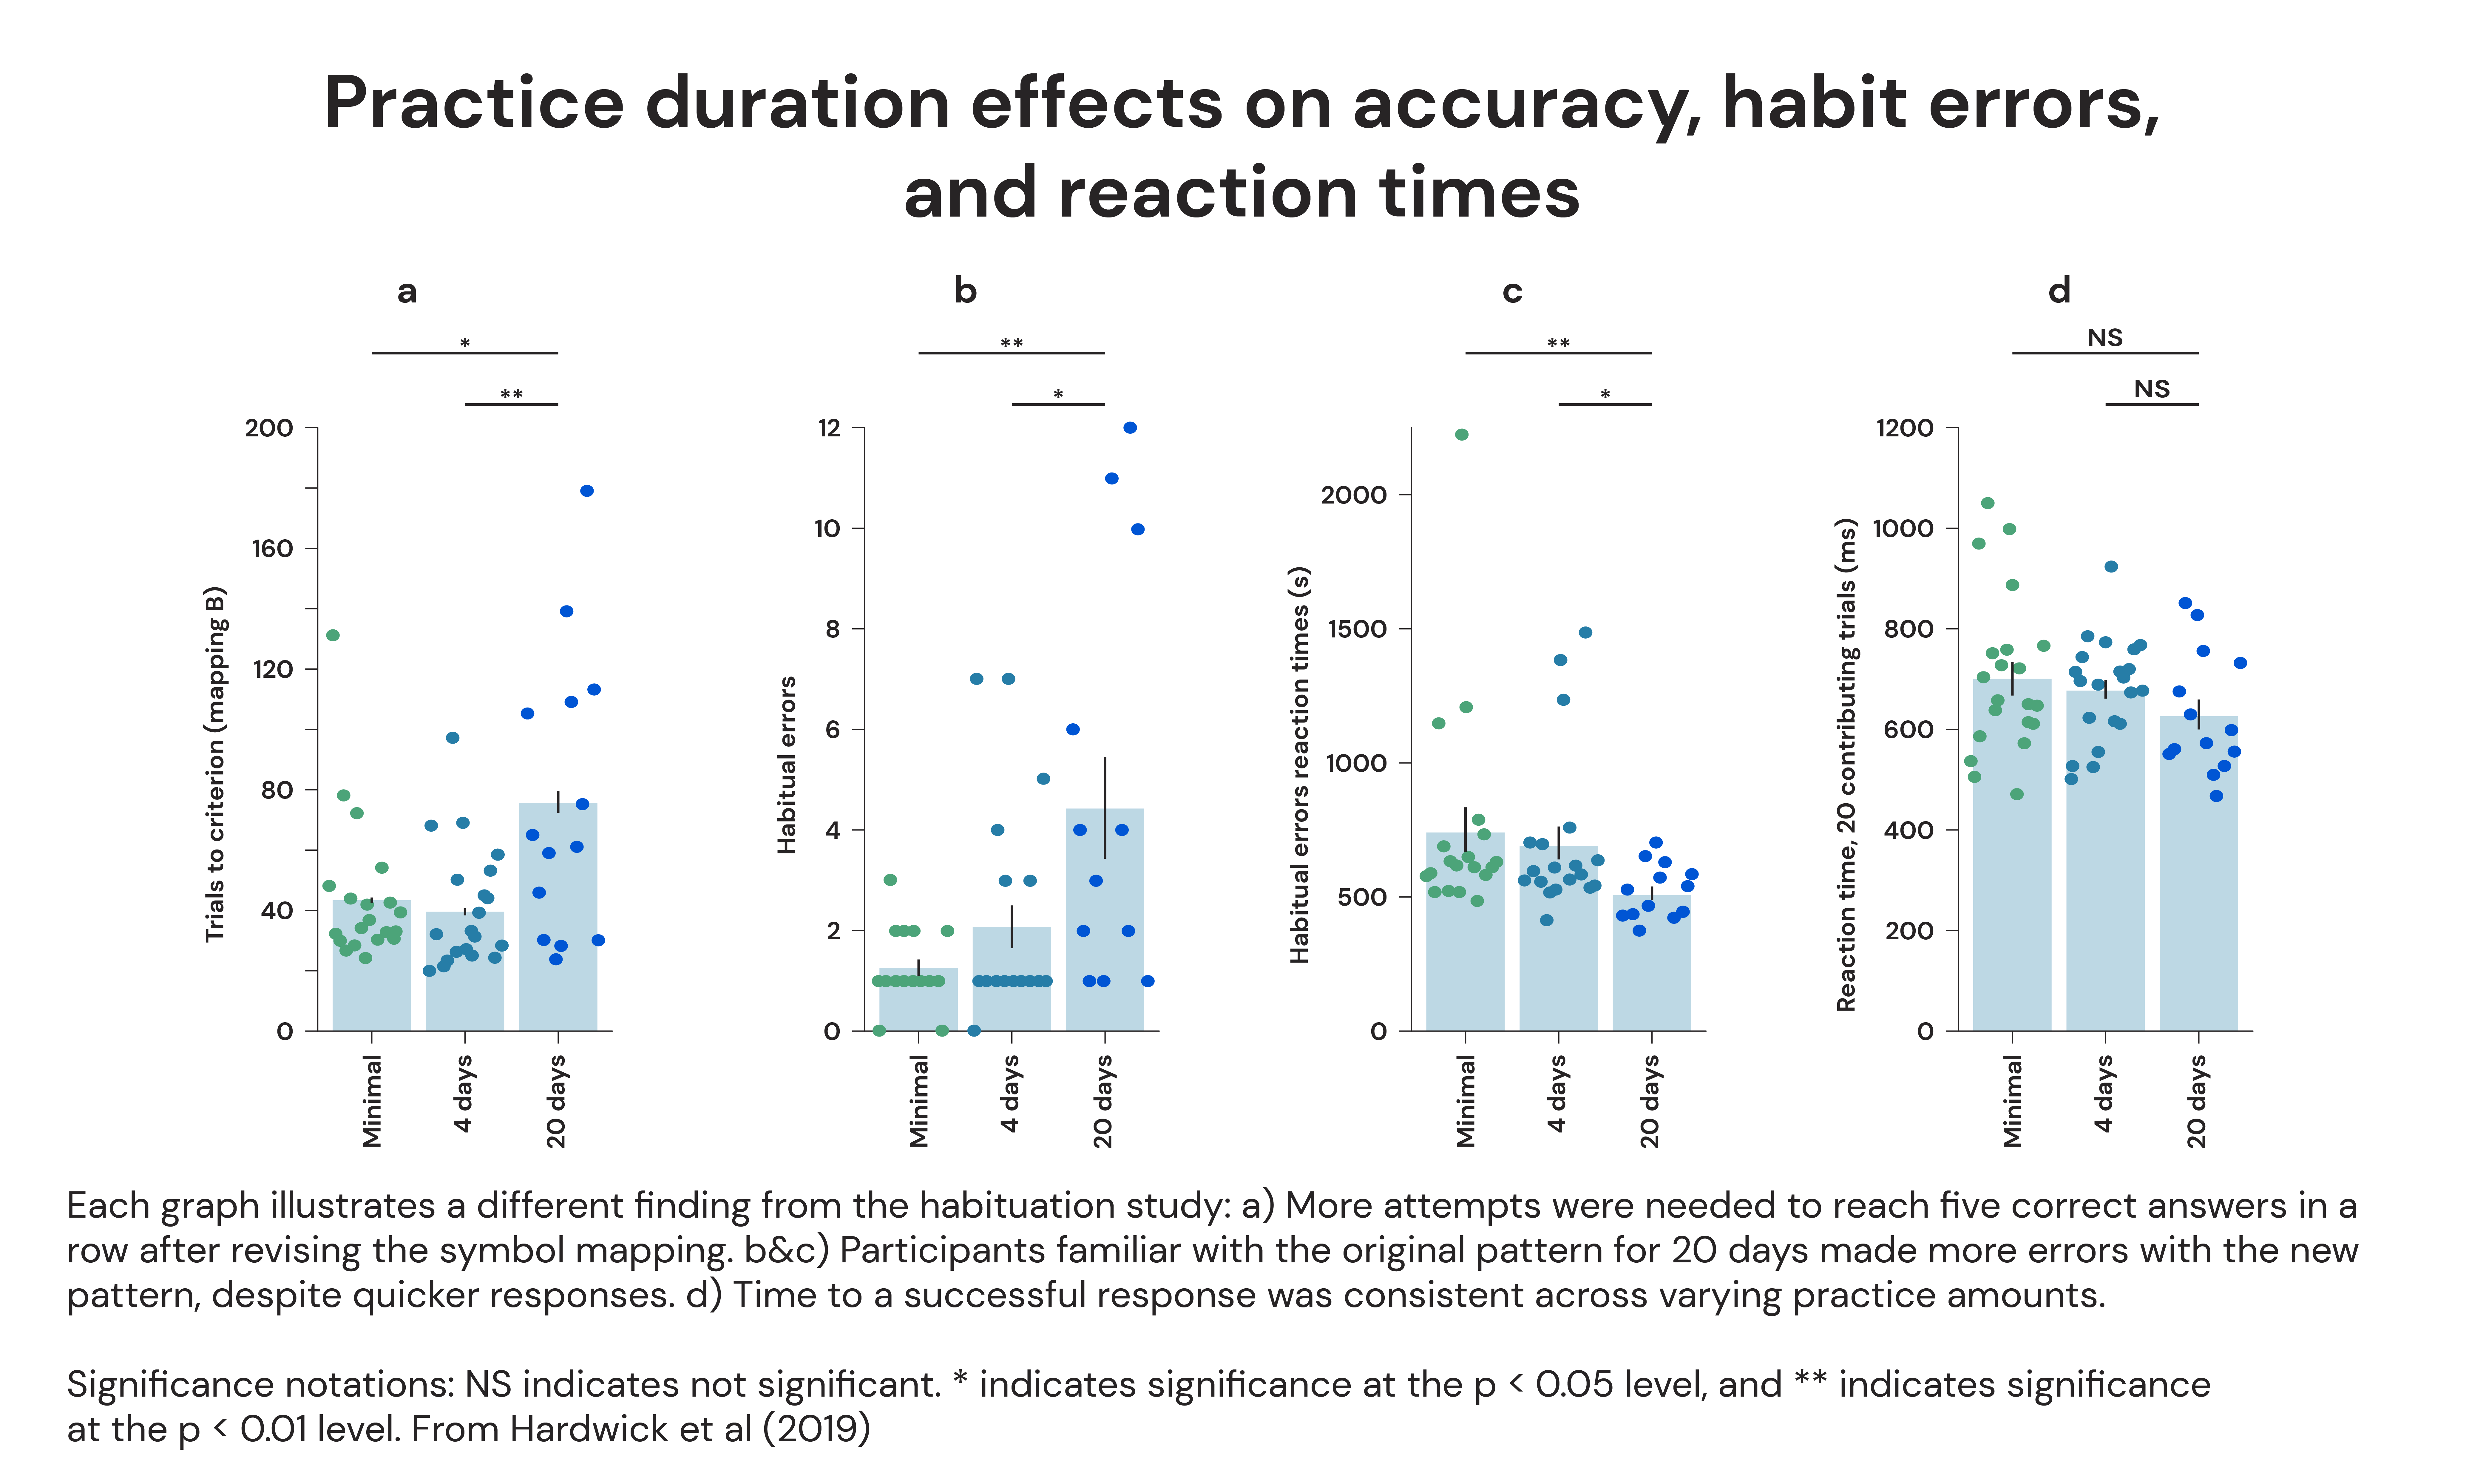 Practice duration effects on accuracy, habits errors, and reaction times. 